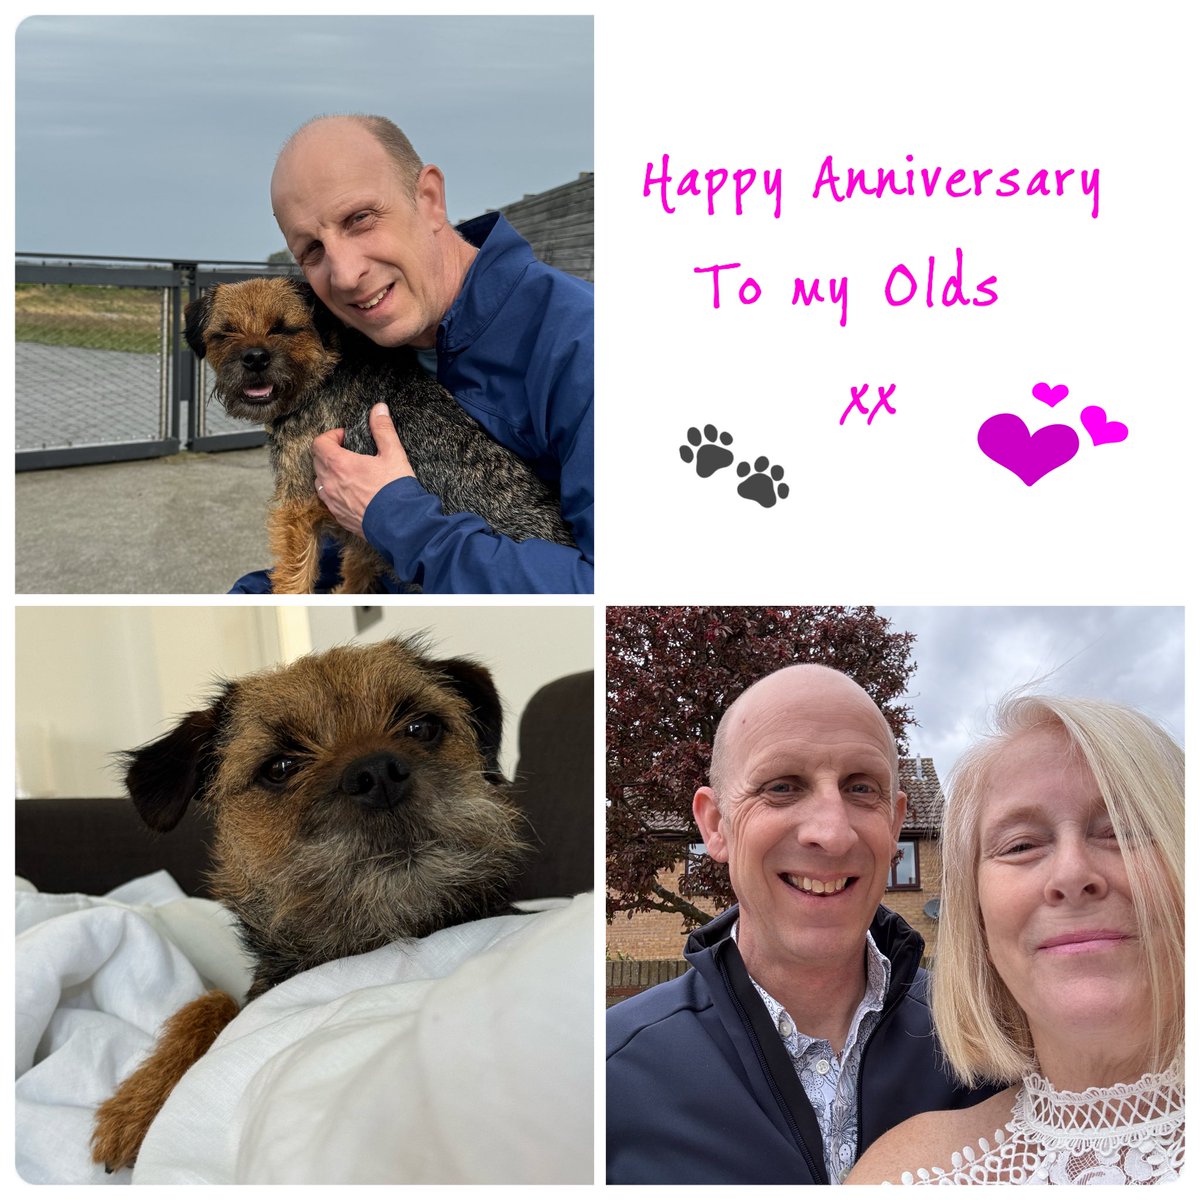 Jeees I knew they was old but 31 years married that’s like a billion dog years😉 I will do my best to make their day memorable 🤣🤣🤣 #happyanniversary #btposse 💕💕🐾🐾